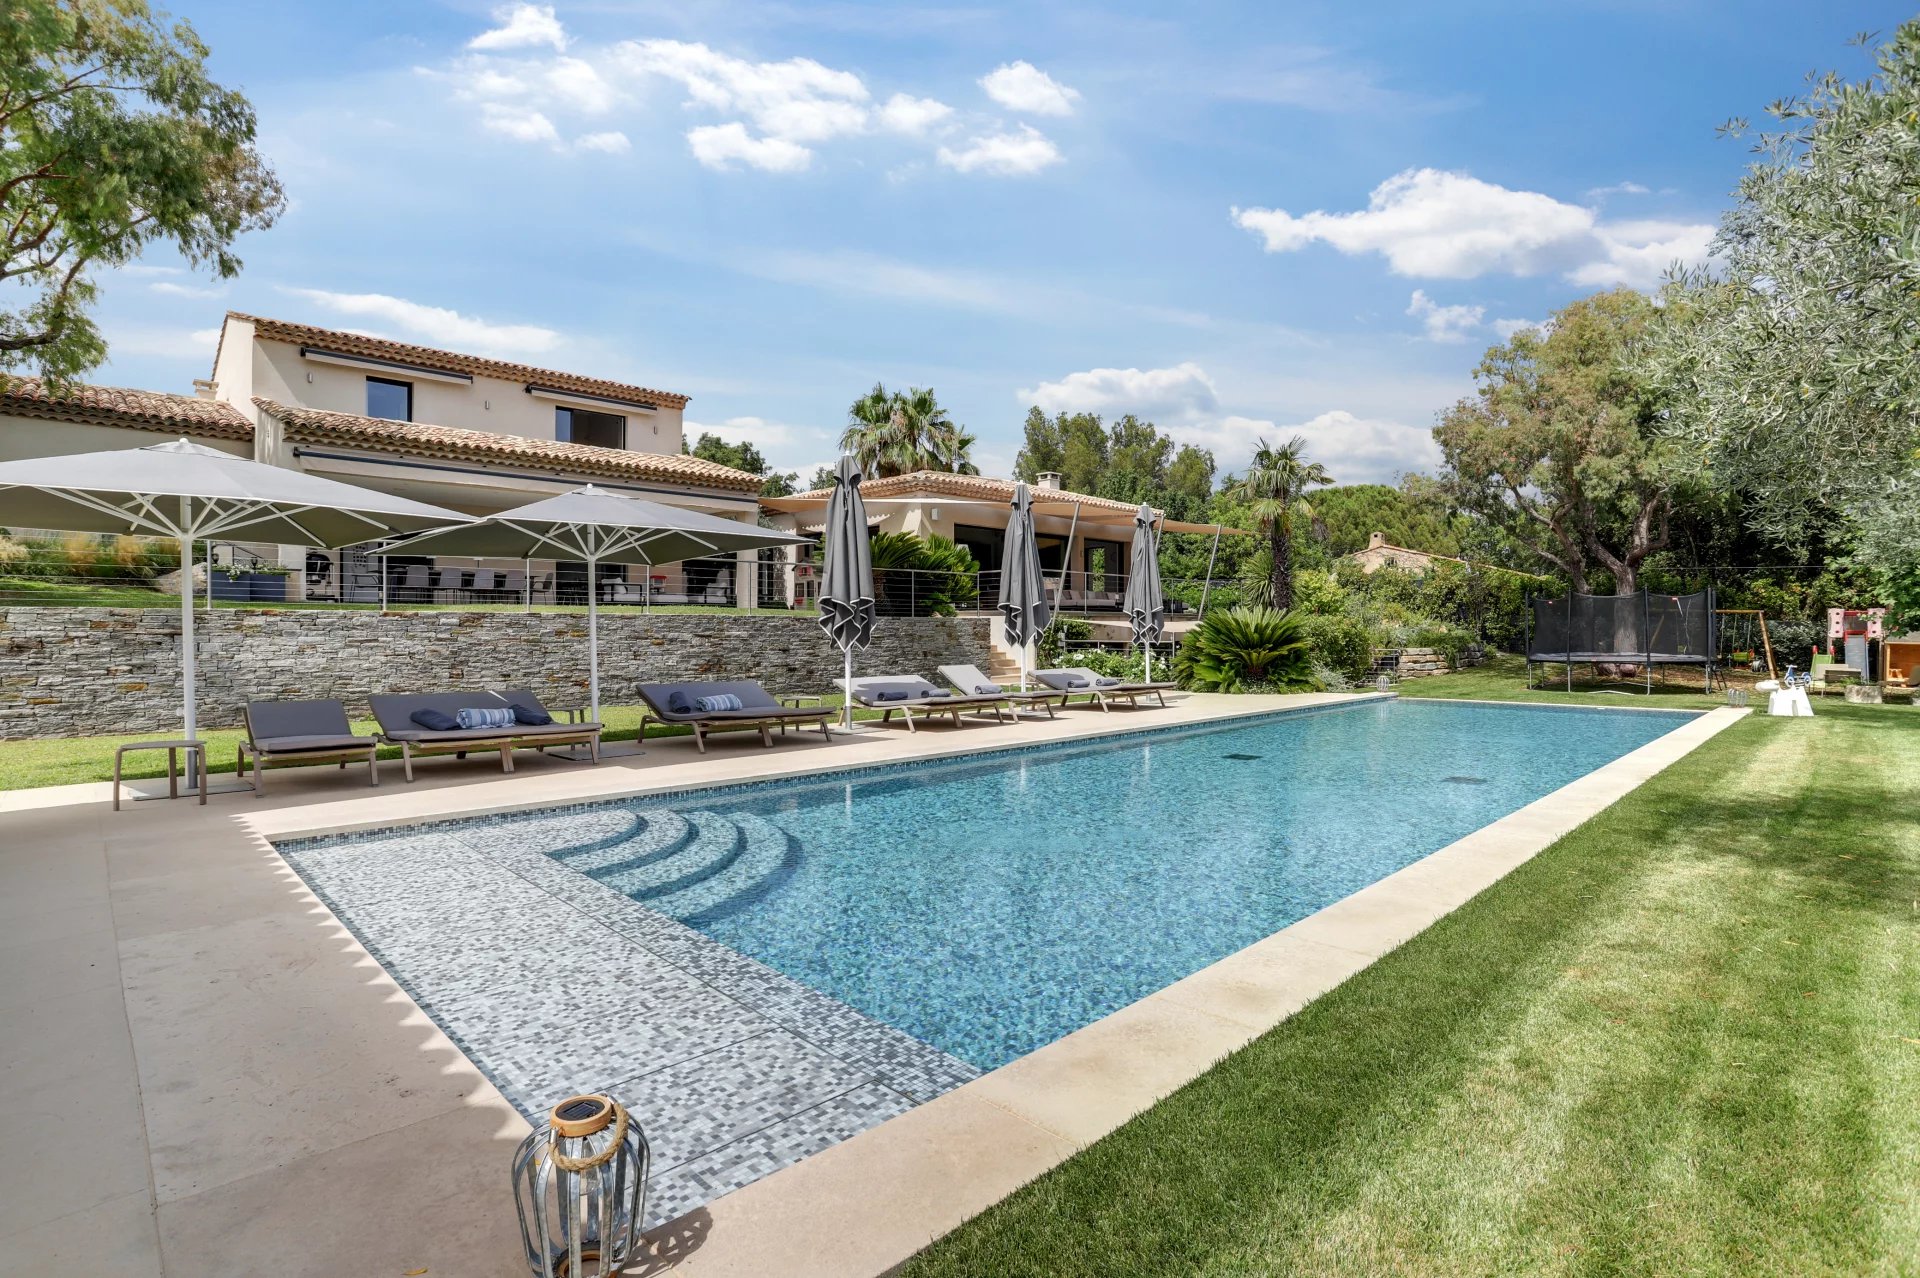 Contemporary villa located in a private domain, ideally situated for the village of Grimaud.